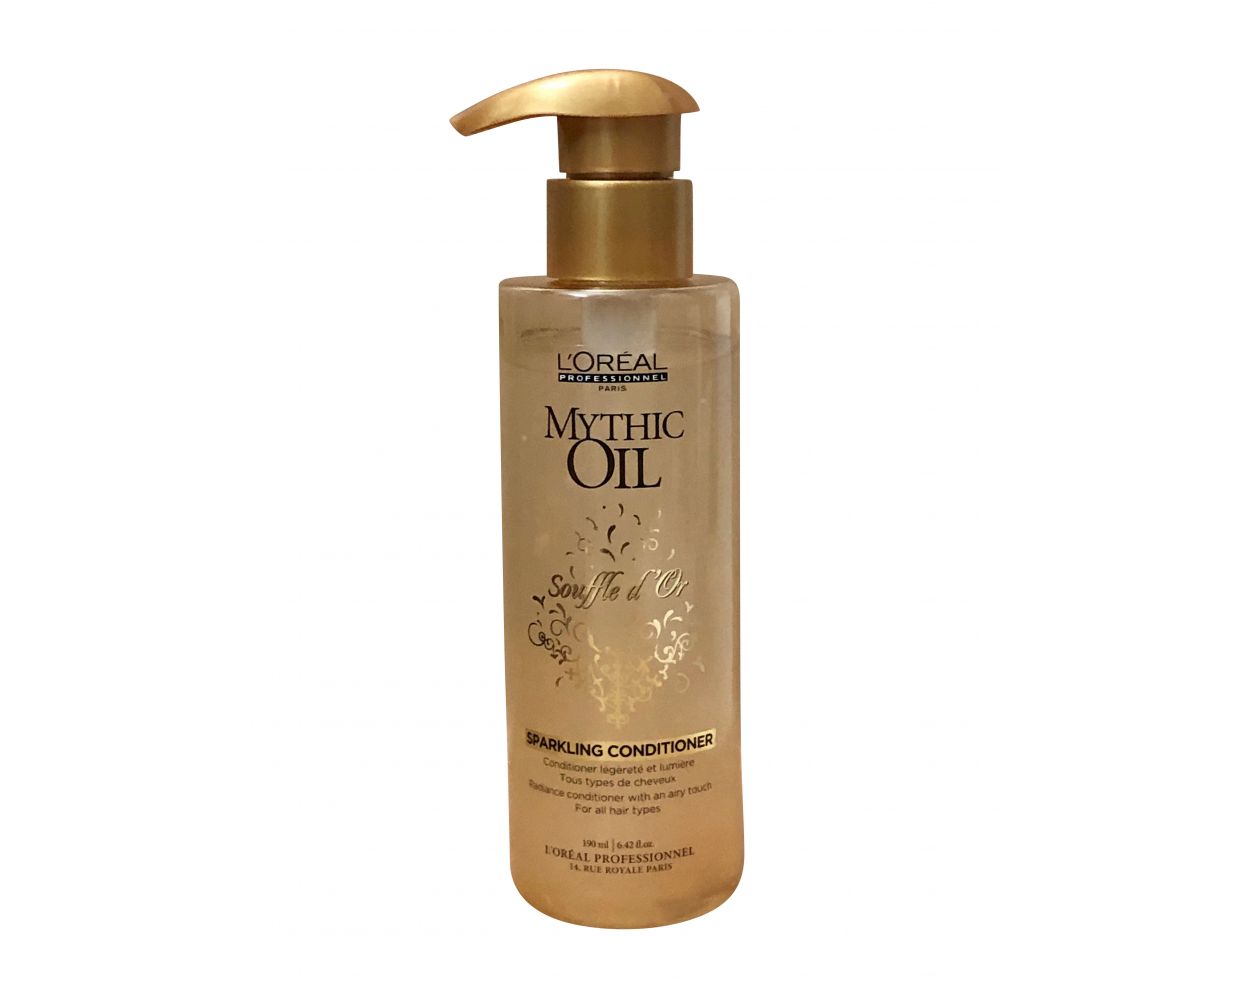 L'Oreal Mythic Oil Souffle d'Or Sparking Conditioner